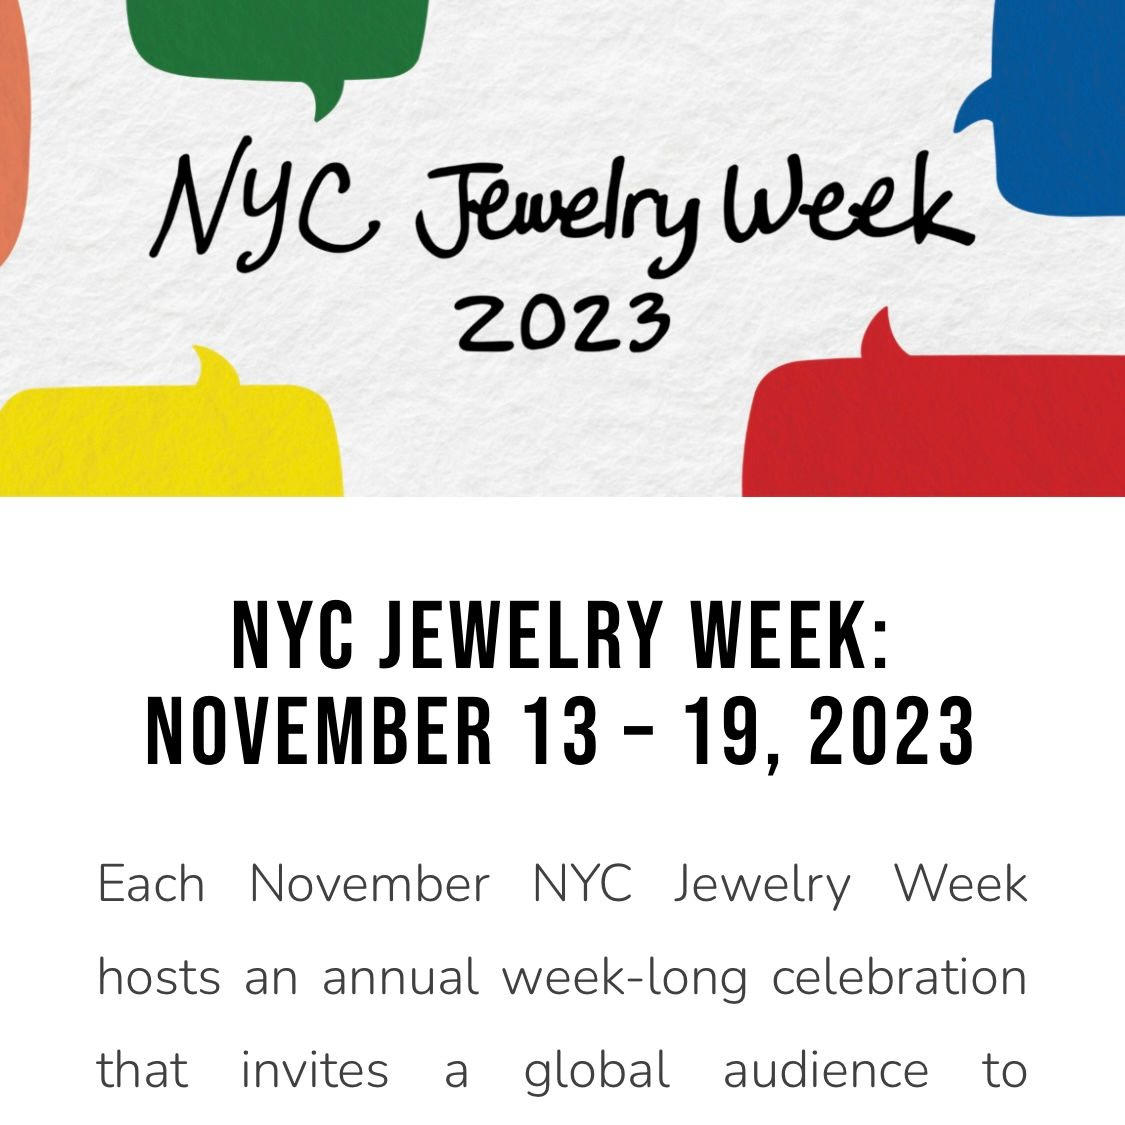 Annette Dam at NYC Jewelry Week Nov 13-19